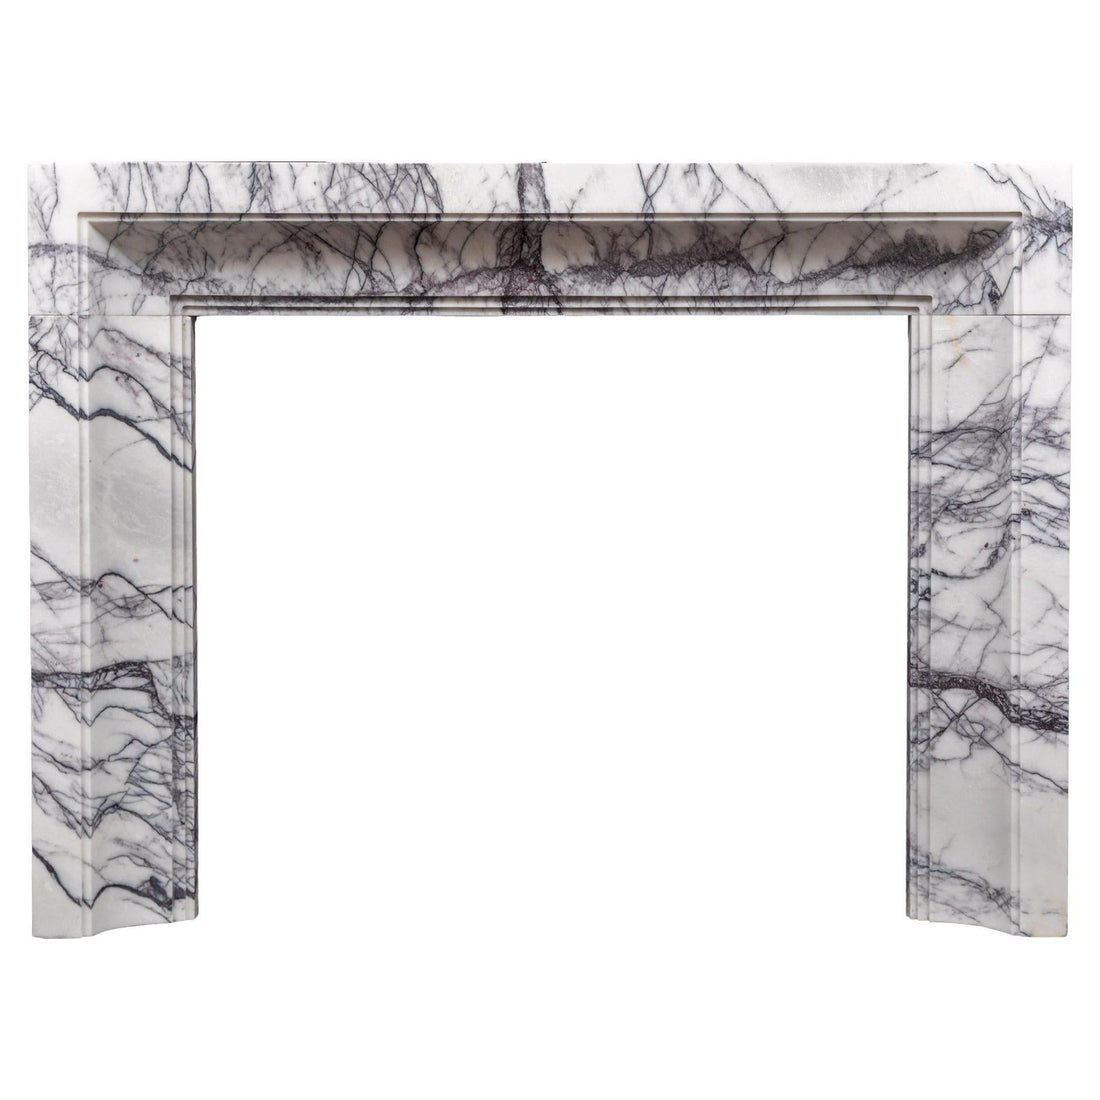 New York Marble Fireplace